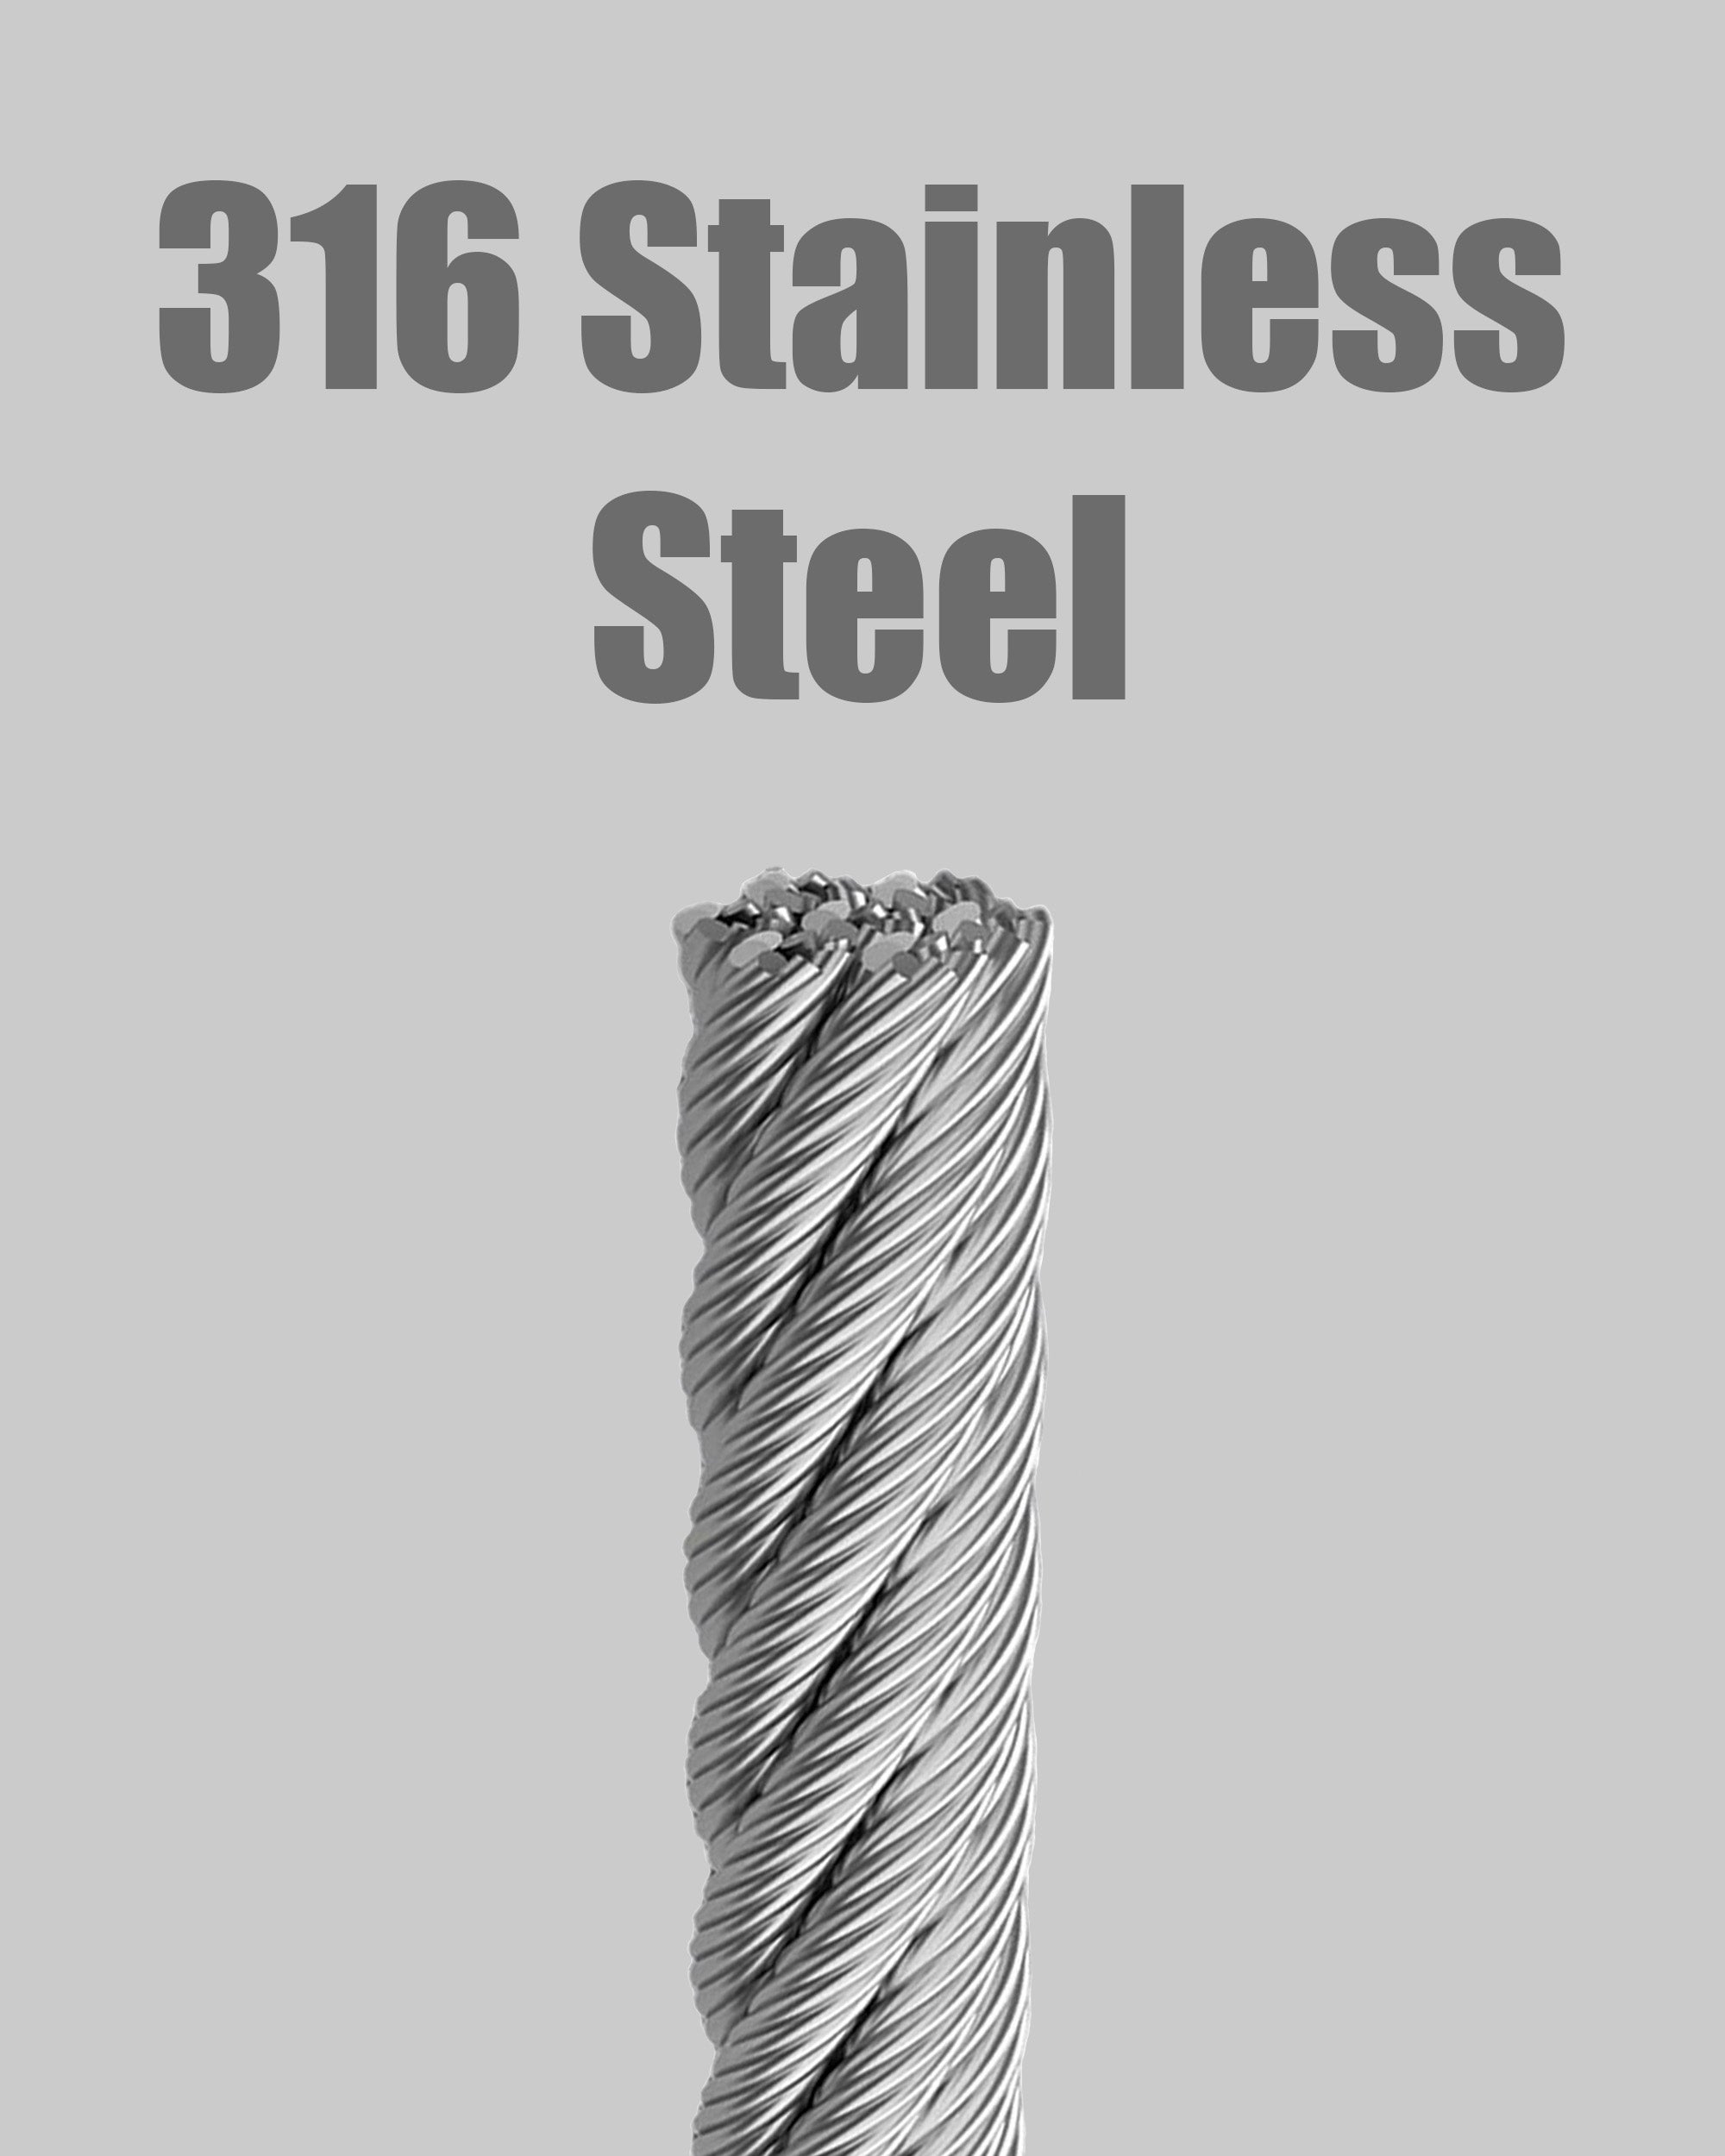 1000FT 1/8" 7x7 Strands Construction Braided Stainless Wire Premium 316 Stainless Steel Deck Cable Railing for Outdoor, DIY Metal Wire Railing, Balustrades Projects